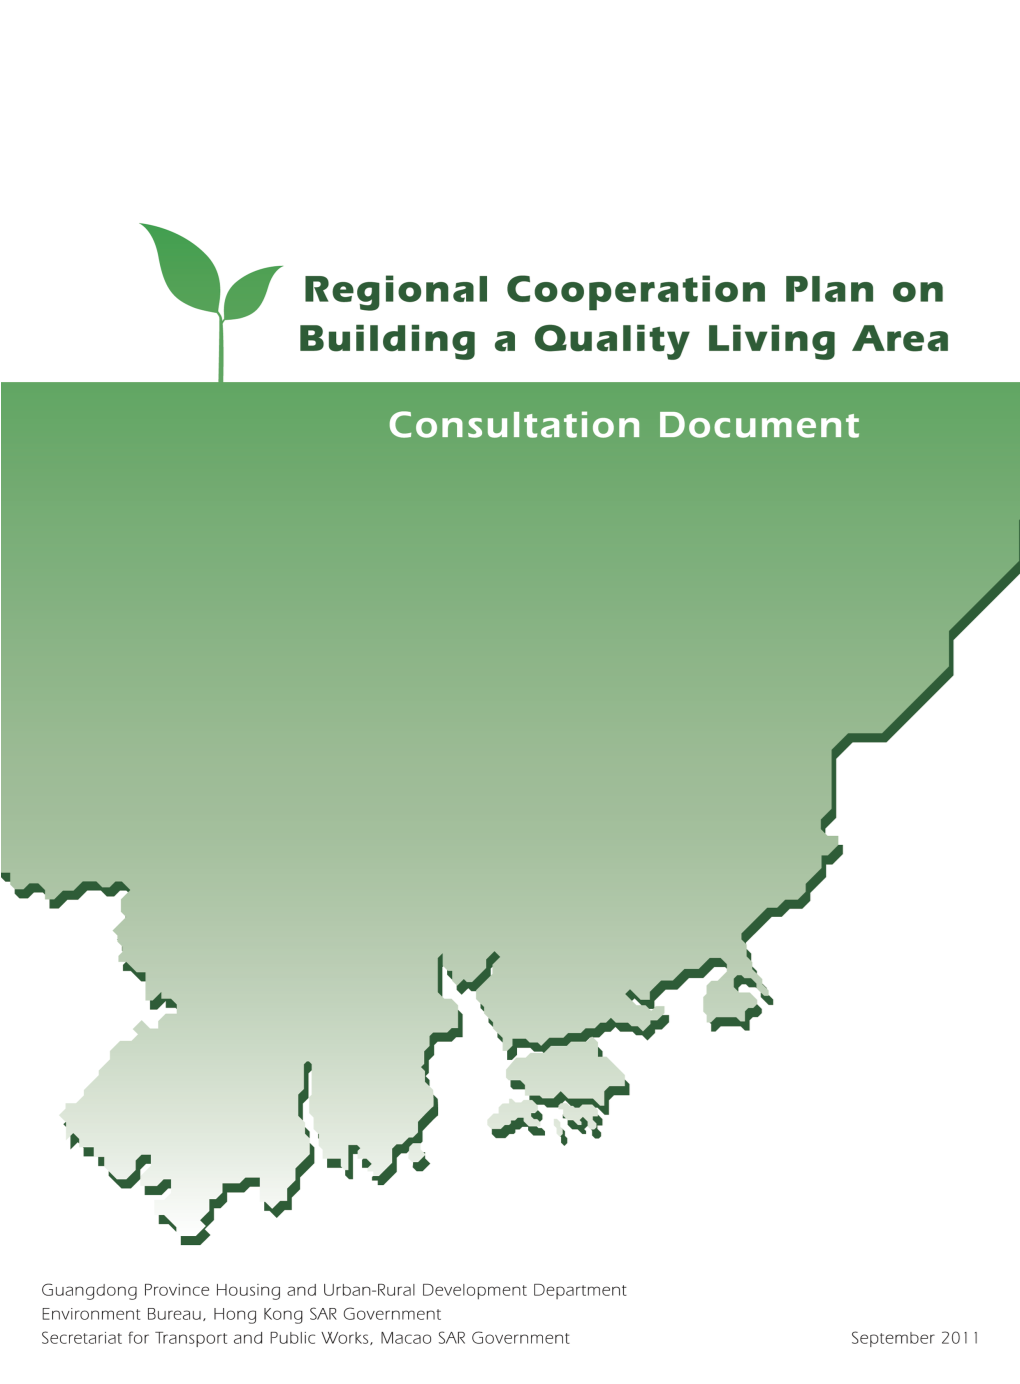 Regional Cooperation Plan on Building a Quality Living Area (The Plan), Which Aims to Propose the Long-Term Cooperation Directions of the Greater PRD Region